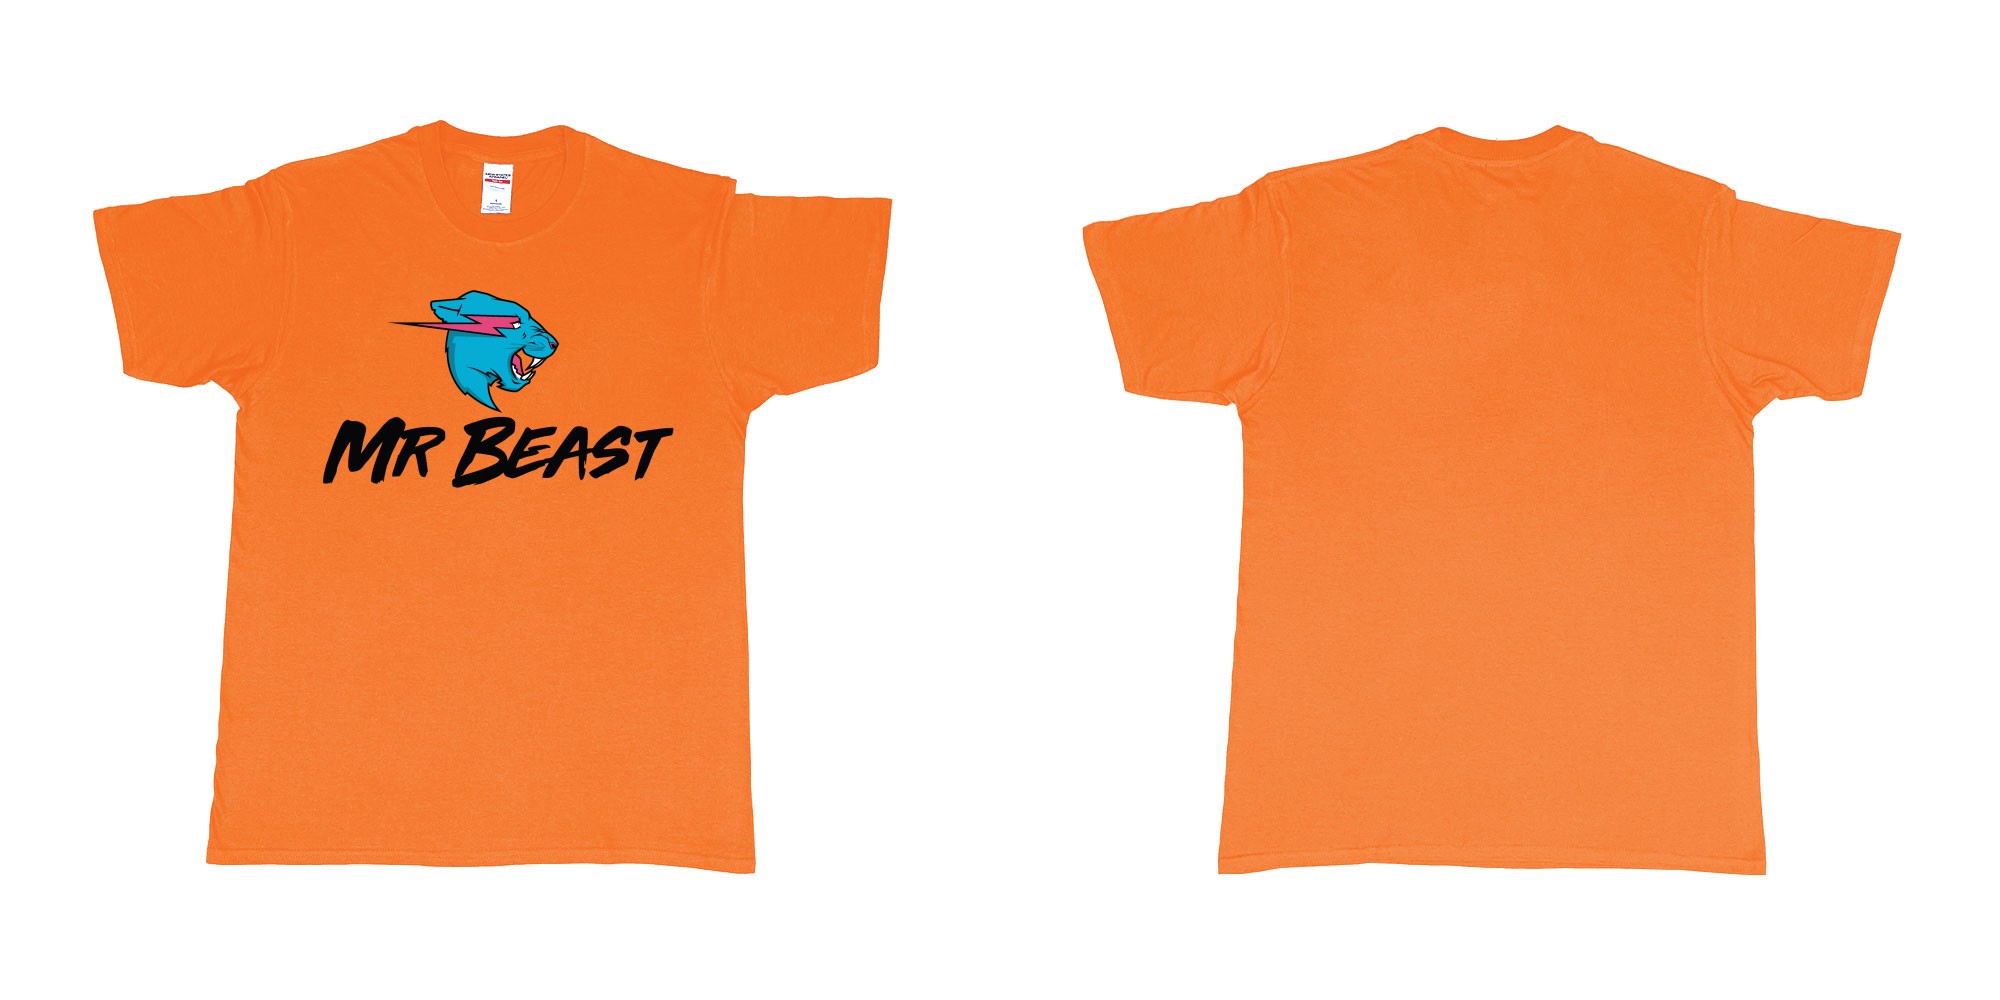 Custom tshirt design mr beast logo in fabric color orange choice your own text made in Bali by The Pirate Way